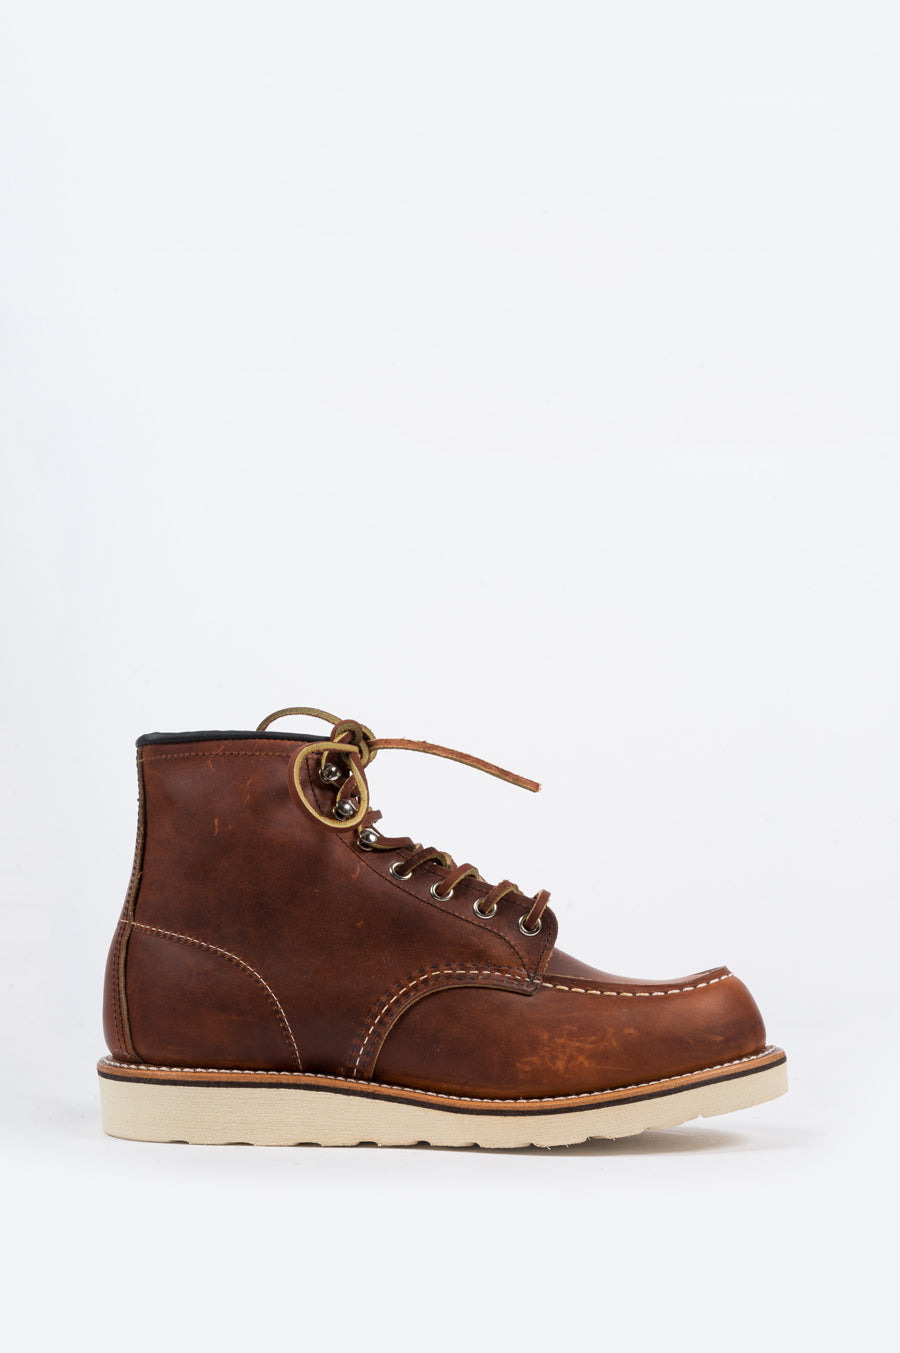 RED WING 87519 6" MOC ORO HARNESS - BLENDS